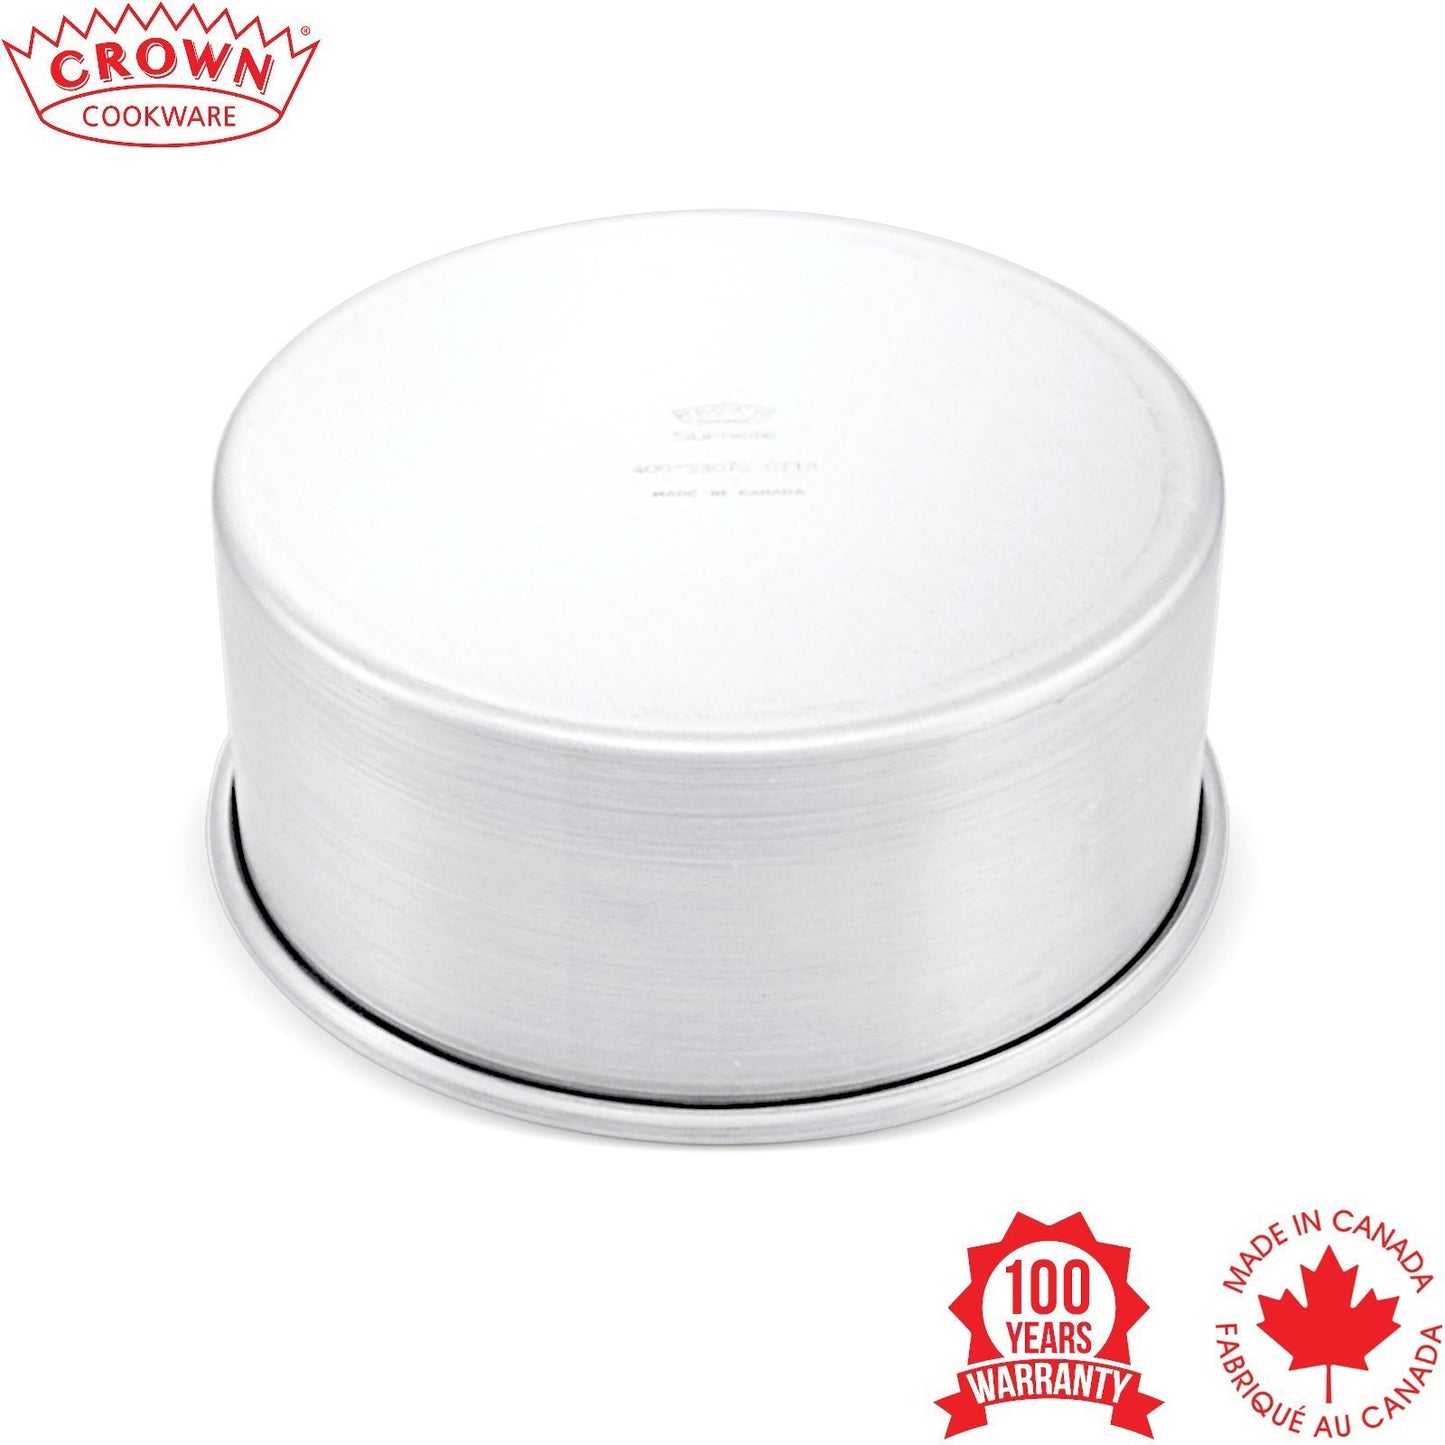 Round Cake Pans, 2 inch Deep - Crown Cookware